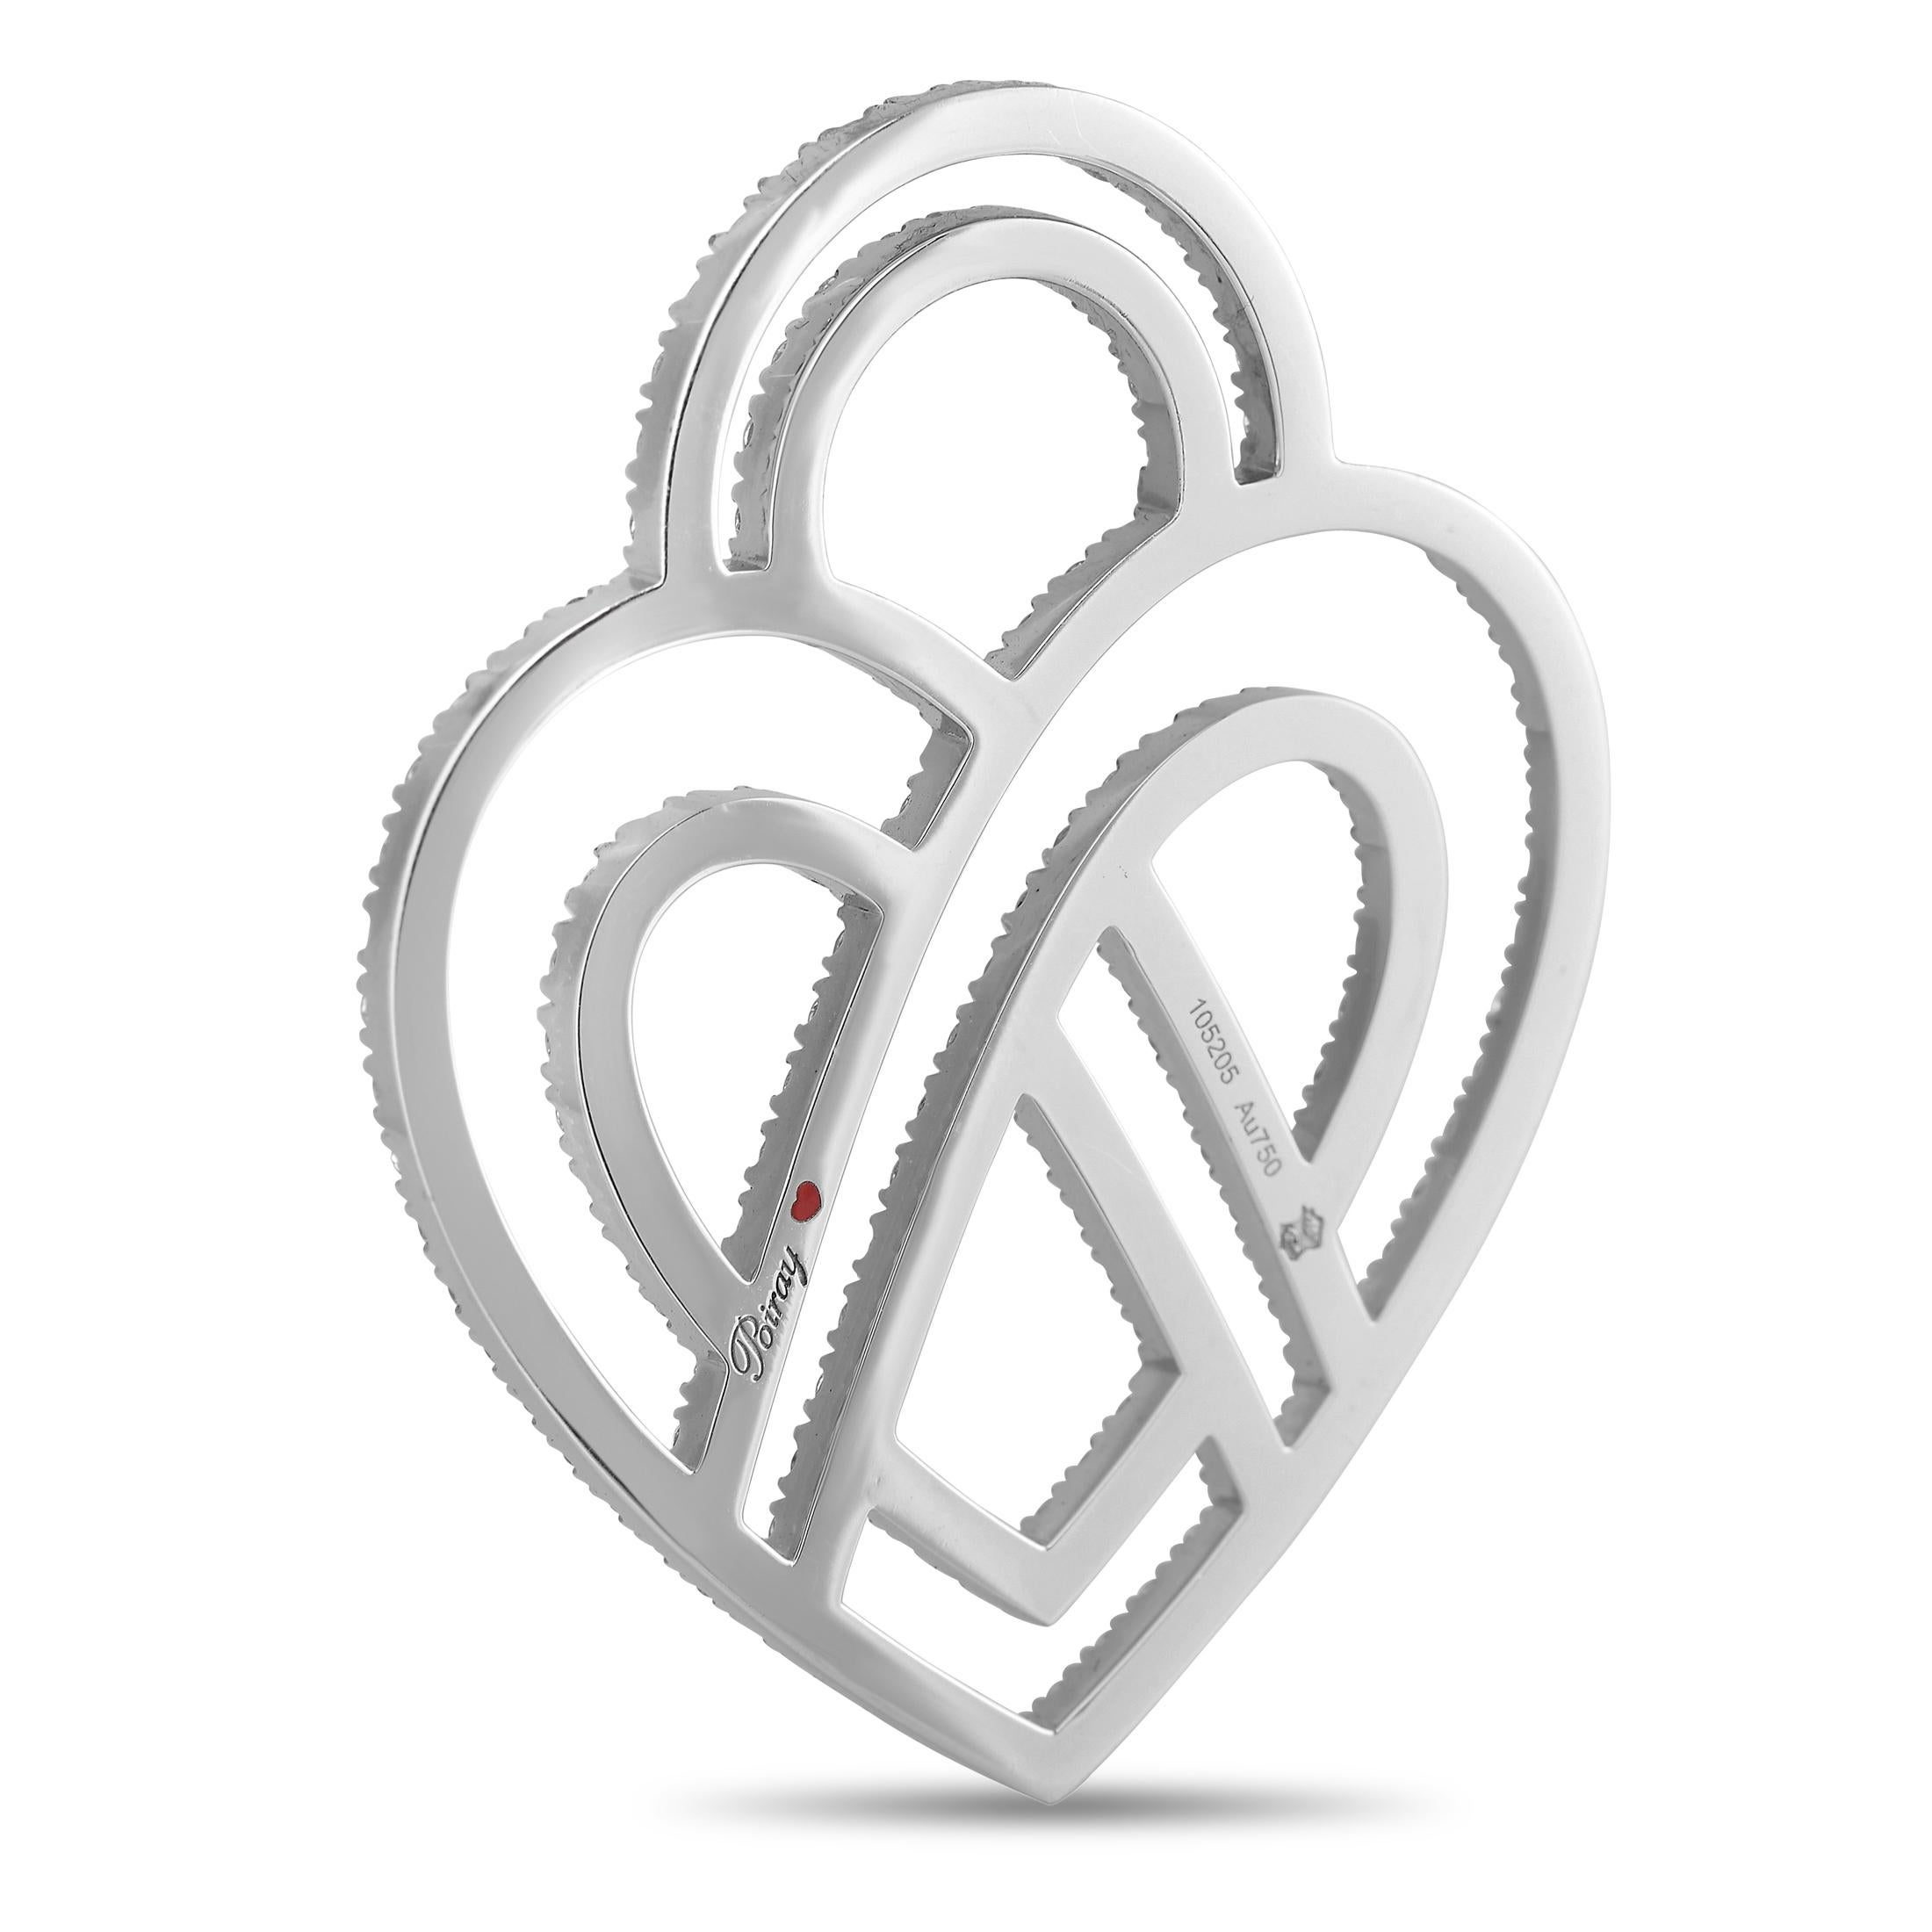 A grand display of style from Poiray, this large pendant will steal your heart. The heart motif is shaped in 18K White Gold to mesmerizing effect. Its precious contours ripple with the luxurious sparkle of 3.75ct diamonds. A truly magnificent design.